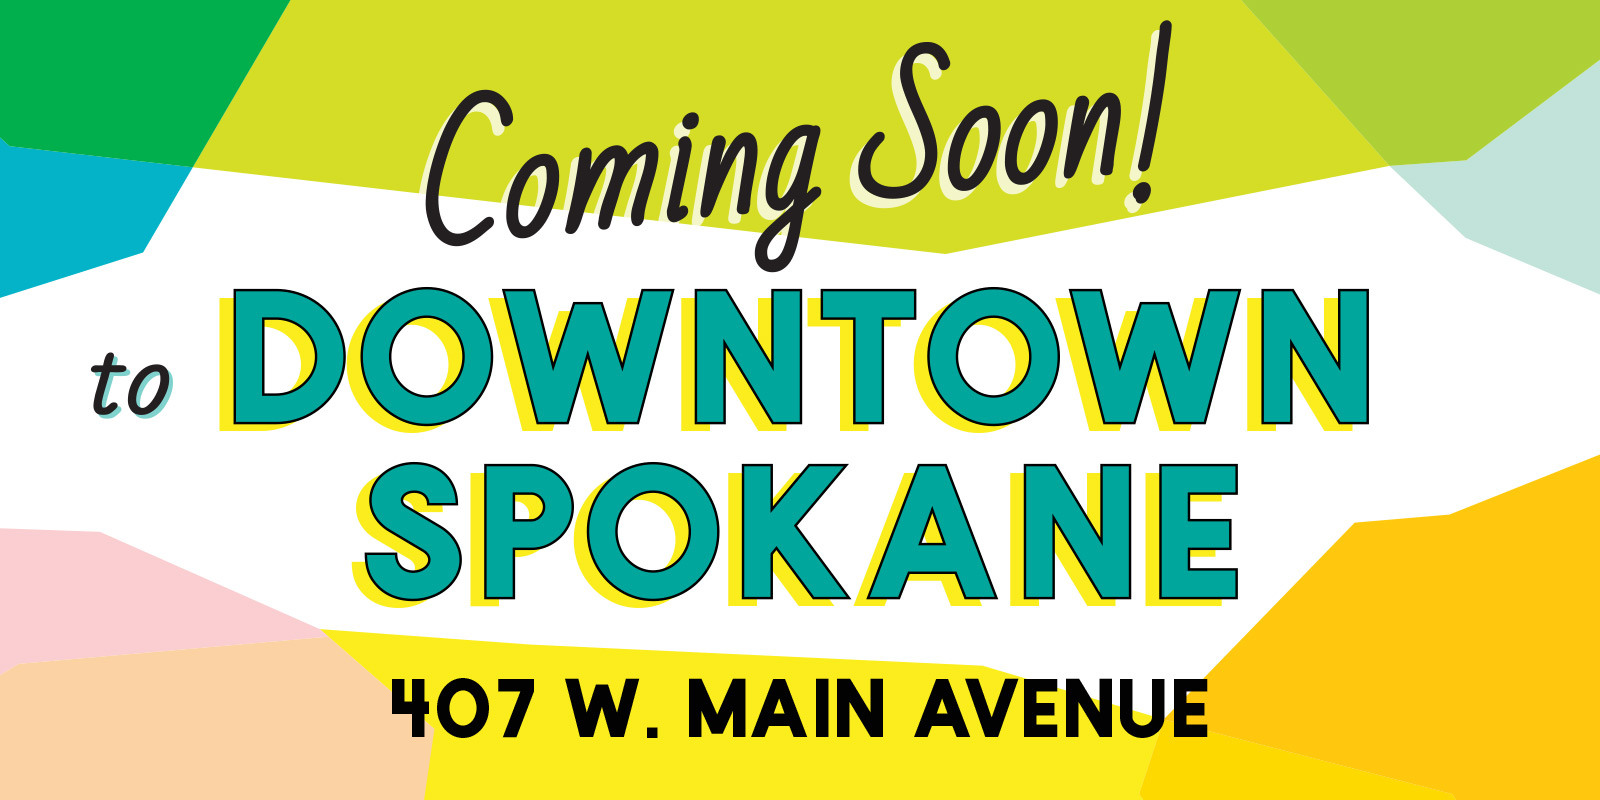 Abstract colored graphic that reads Coming Soon to Downtown Spokane 407 W Main Ave